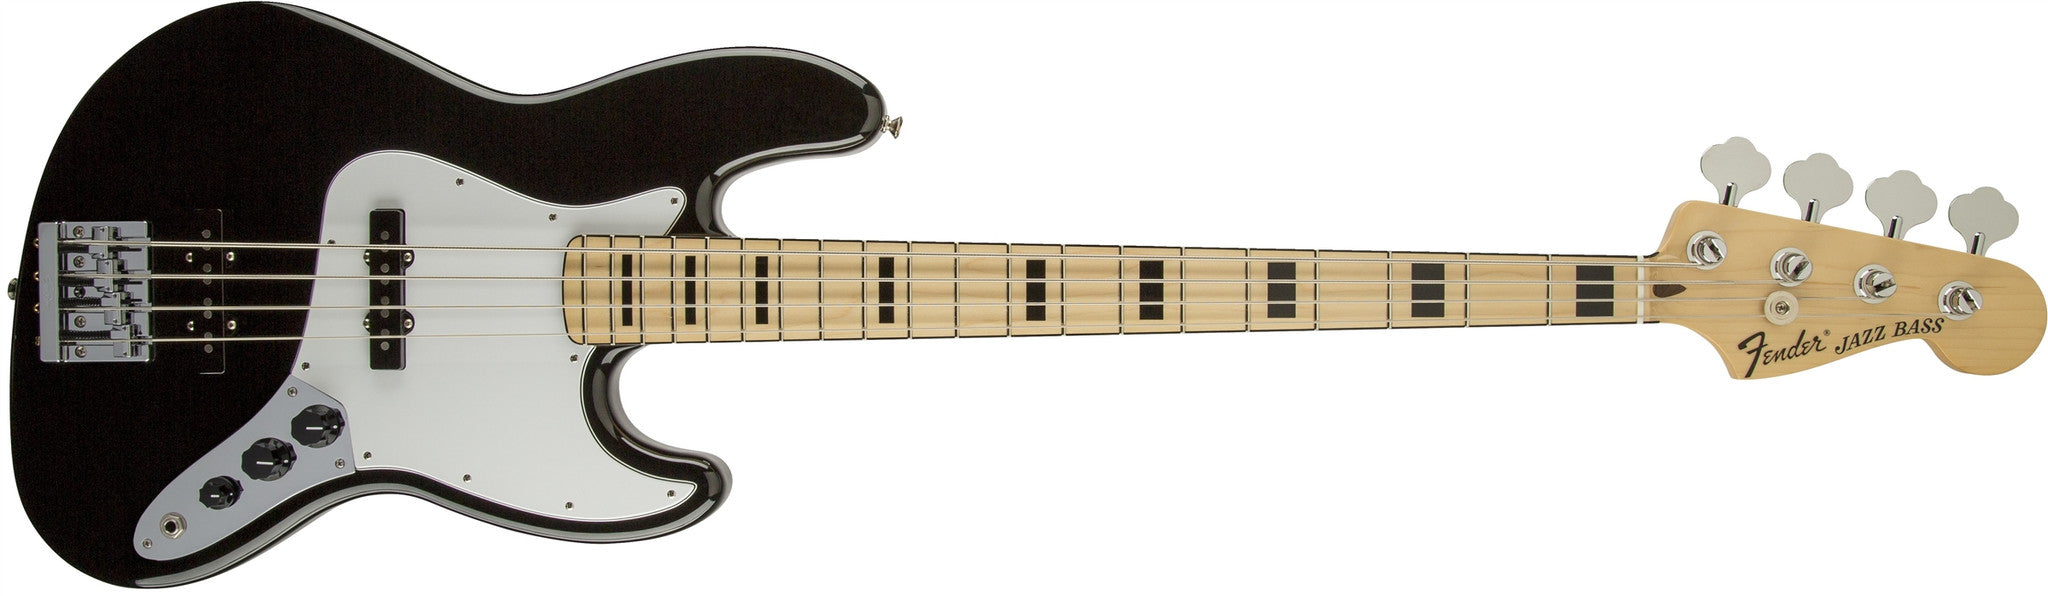 Fender Geddy Lee Jazz Bass®, Maple Fingerboard, Black, 3-Ply White Pickguard 0147702306 - L.A. Music - Canada's Favourite Music Store!